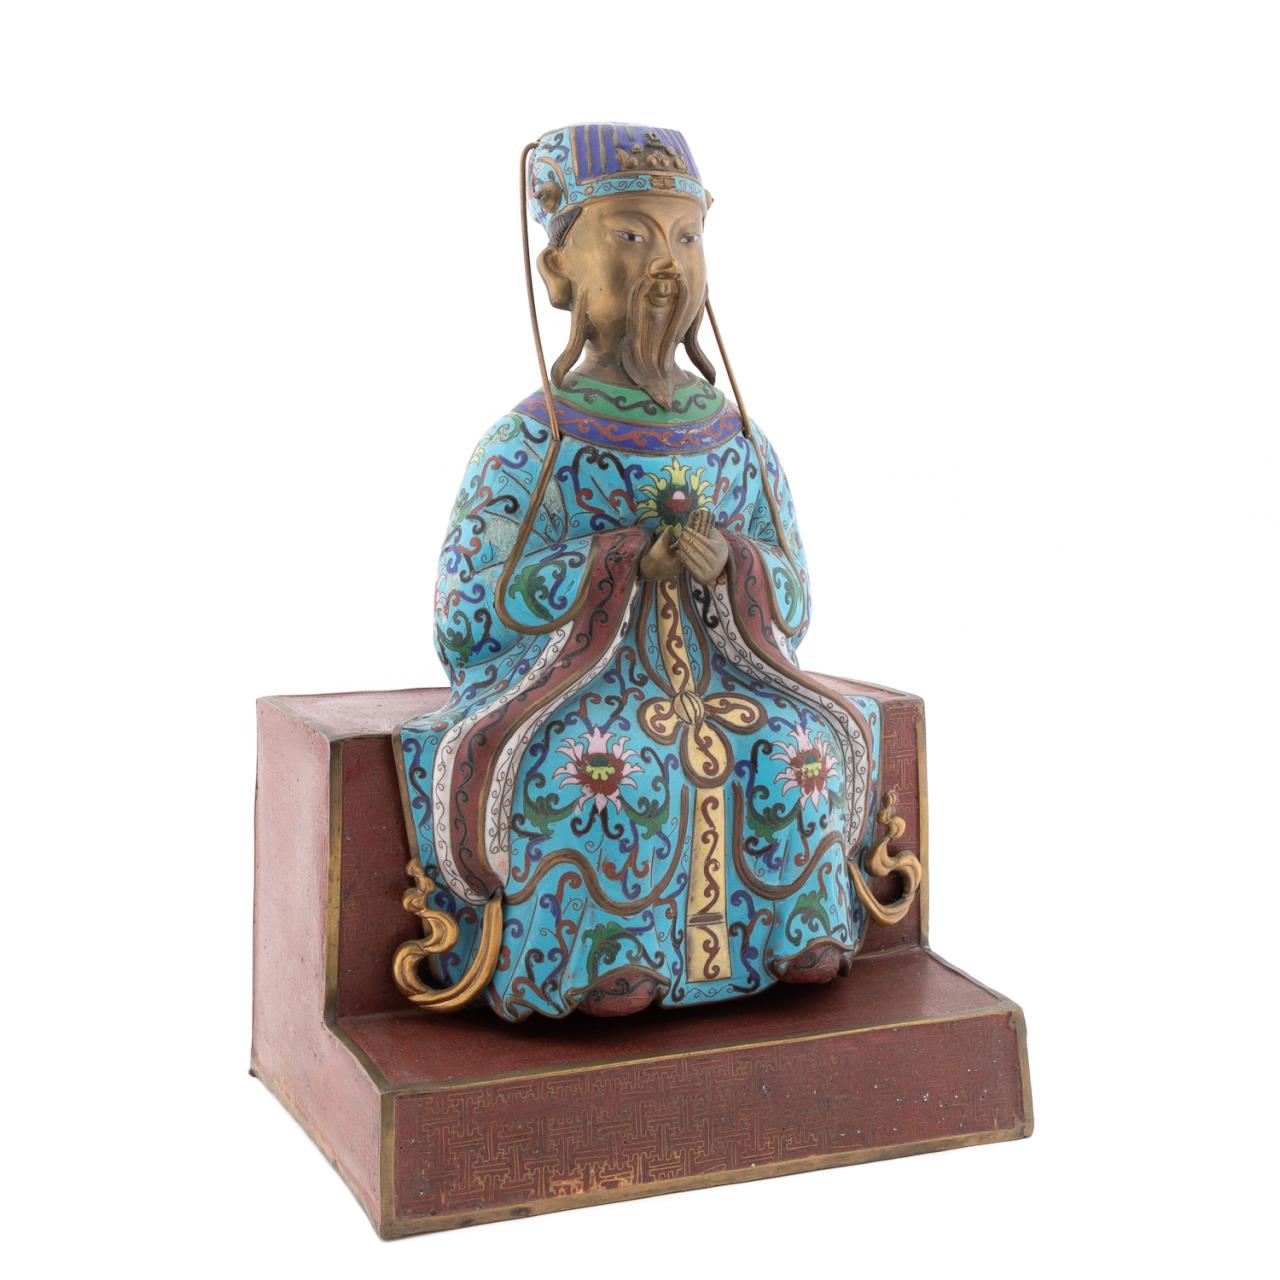 CHINESE CLOISONNE SEATED FIGURE 35c37e